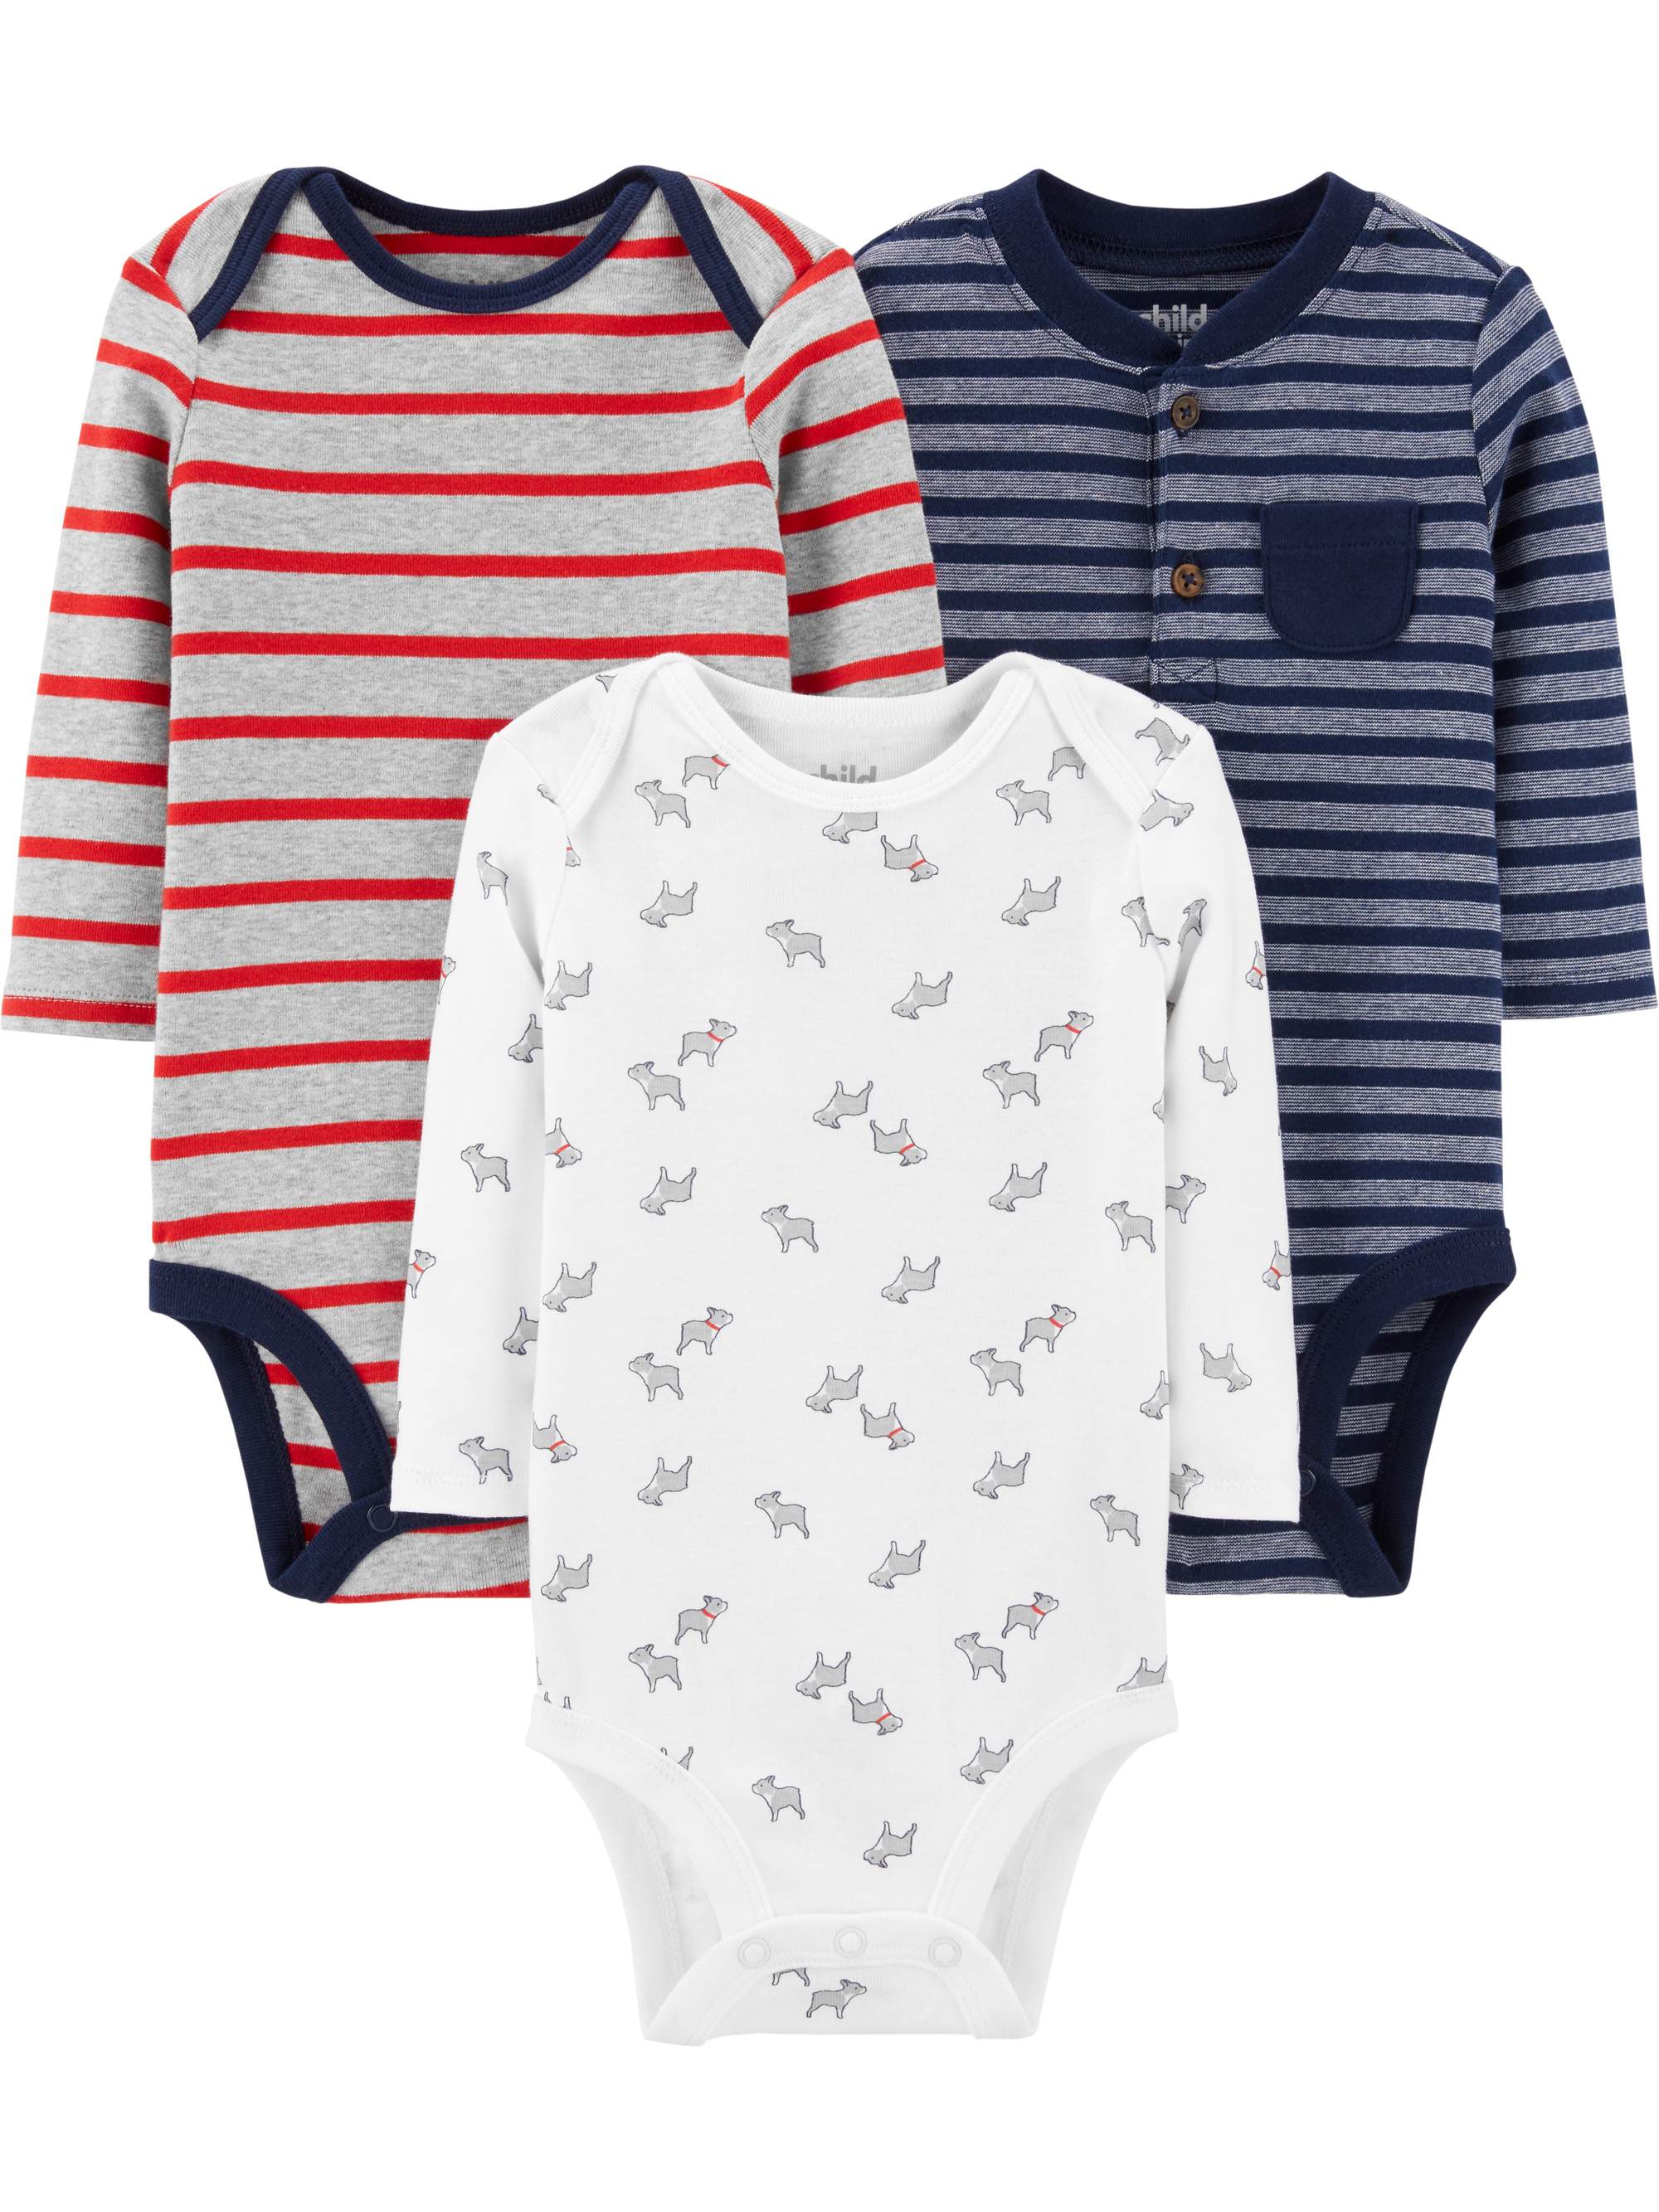 Carter's Child of Mine Baby Boy Long Sleeve Bodysuits, 3 Pack, Preemie-24 Months - image 1 of 5